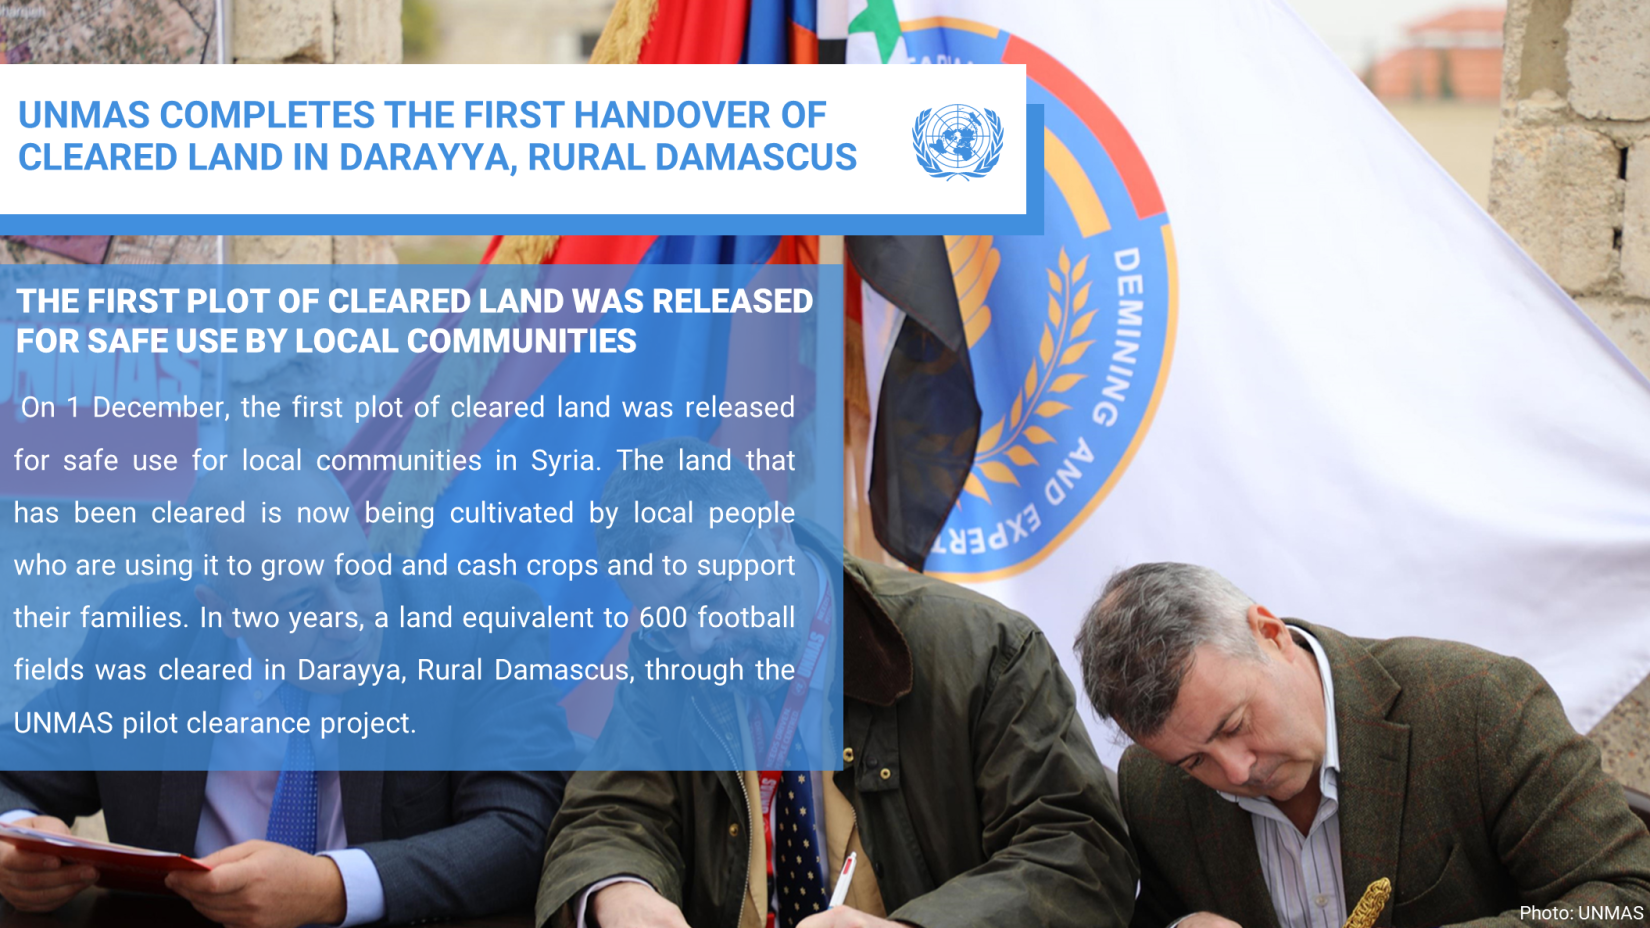 UNMAS COMPLETES THE FIRST HANDOVER OF CLEARED LAND IN DARAYYA, RURAL DAMASCUS